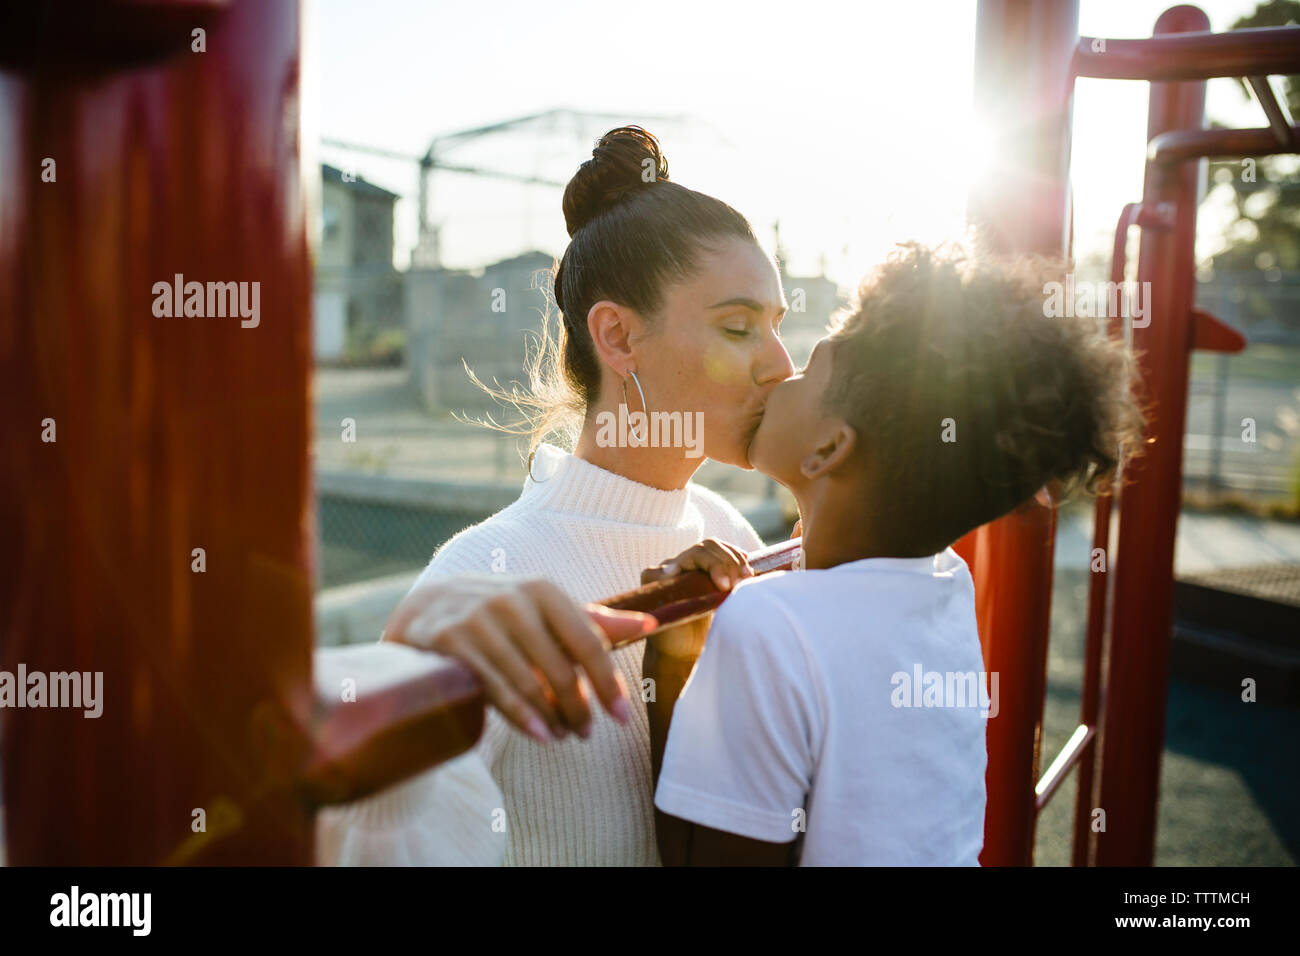 Loving mother and son kissing on mouth at playground Stock Photo